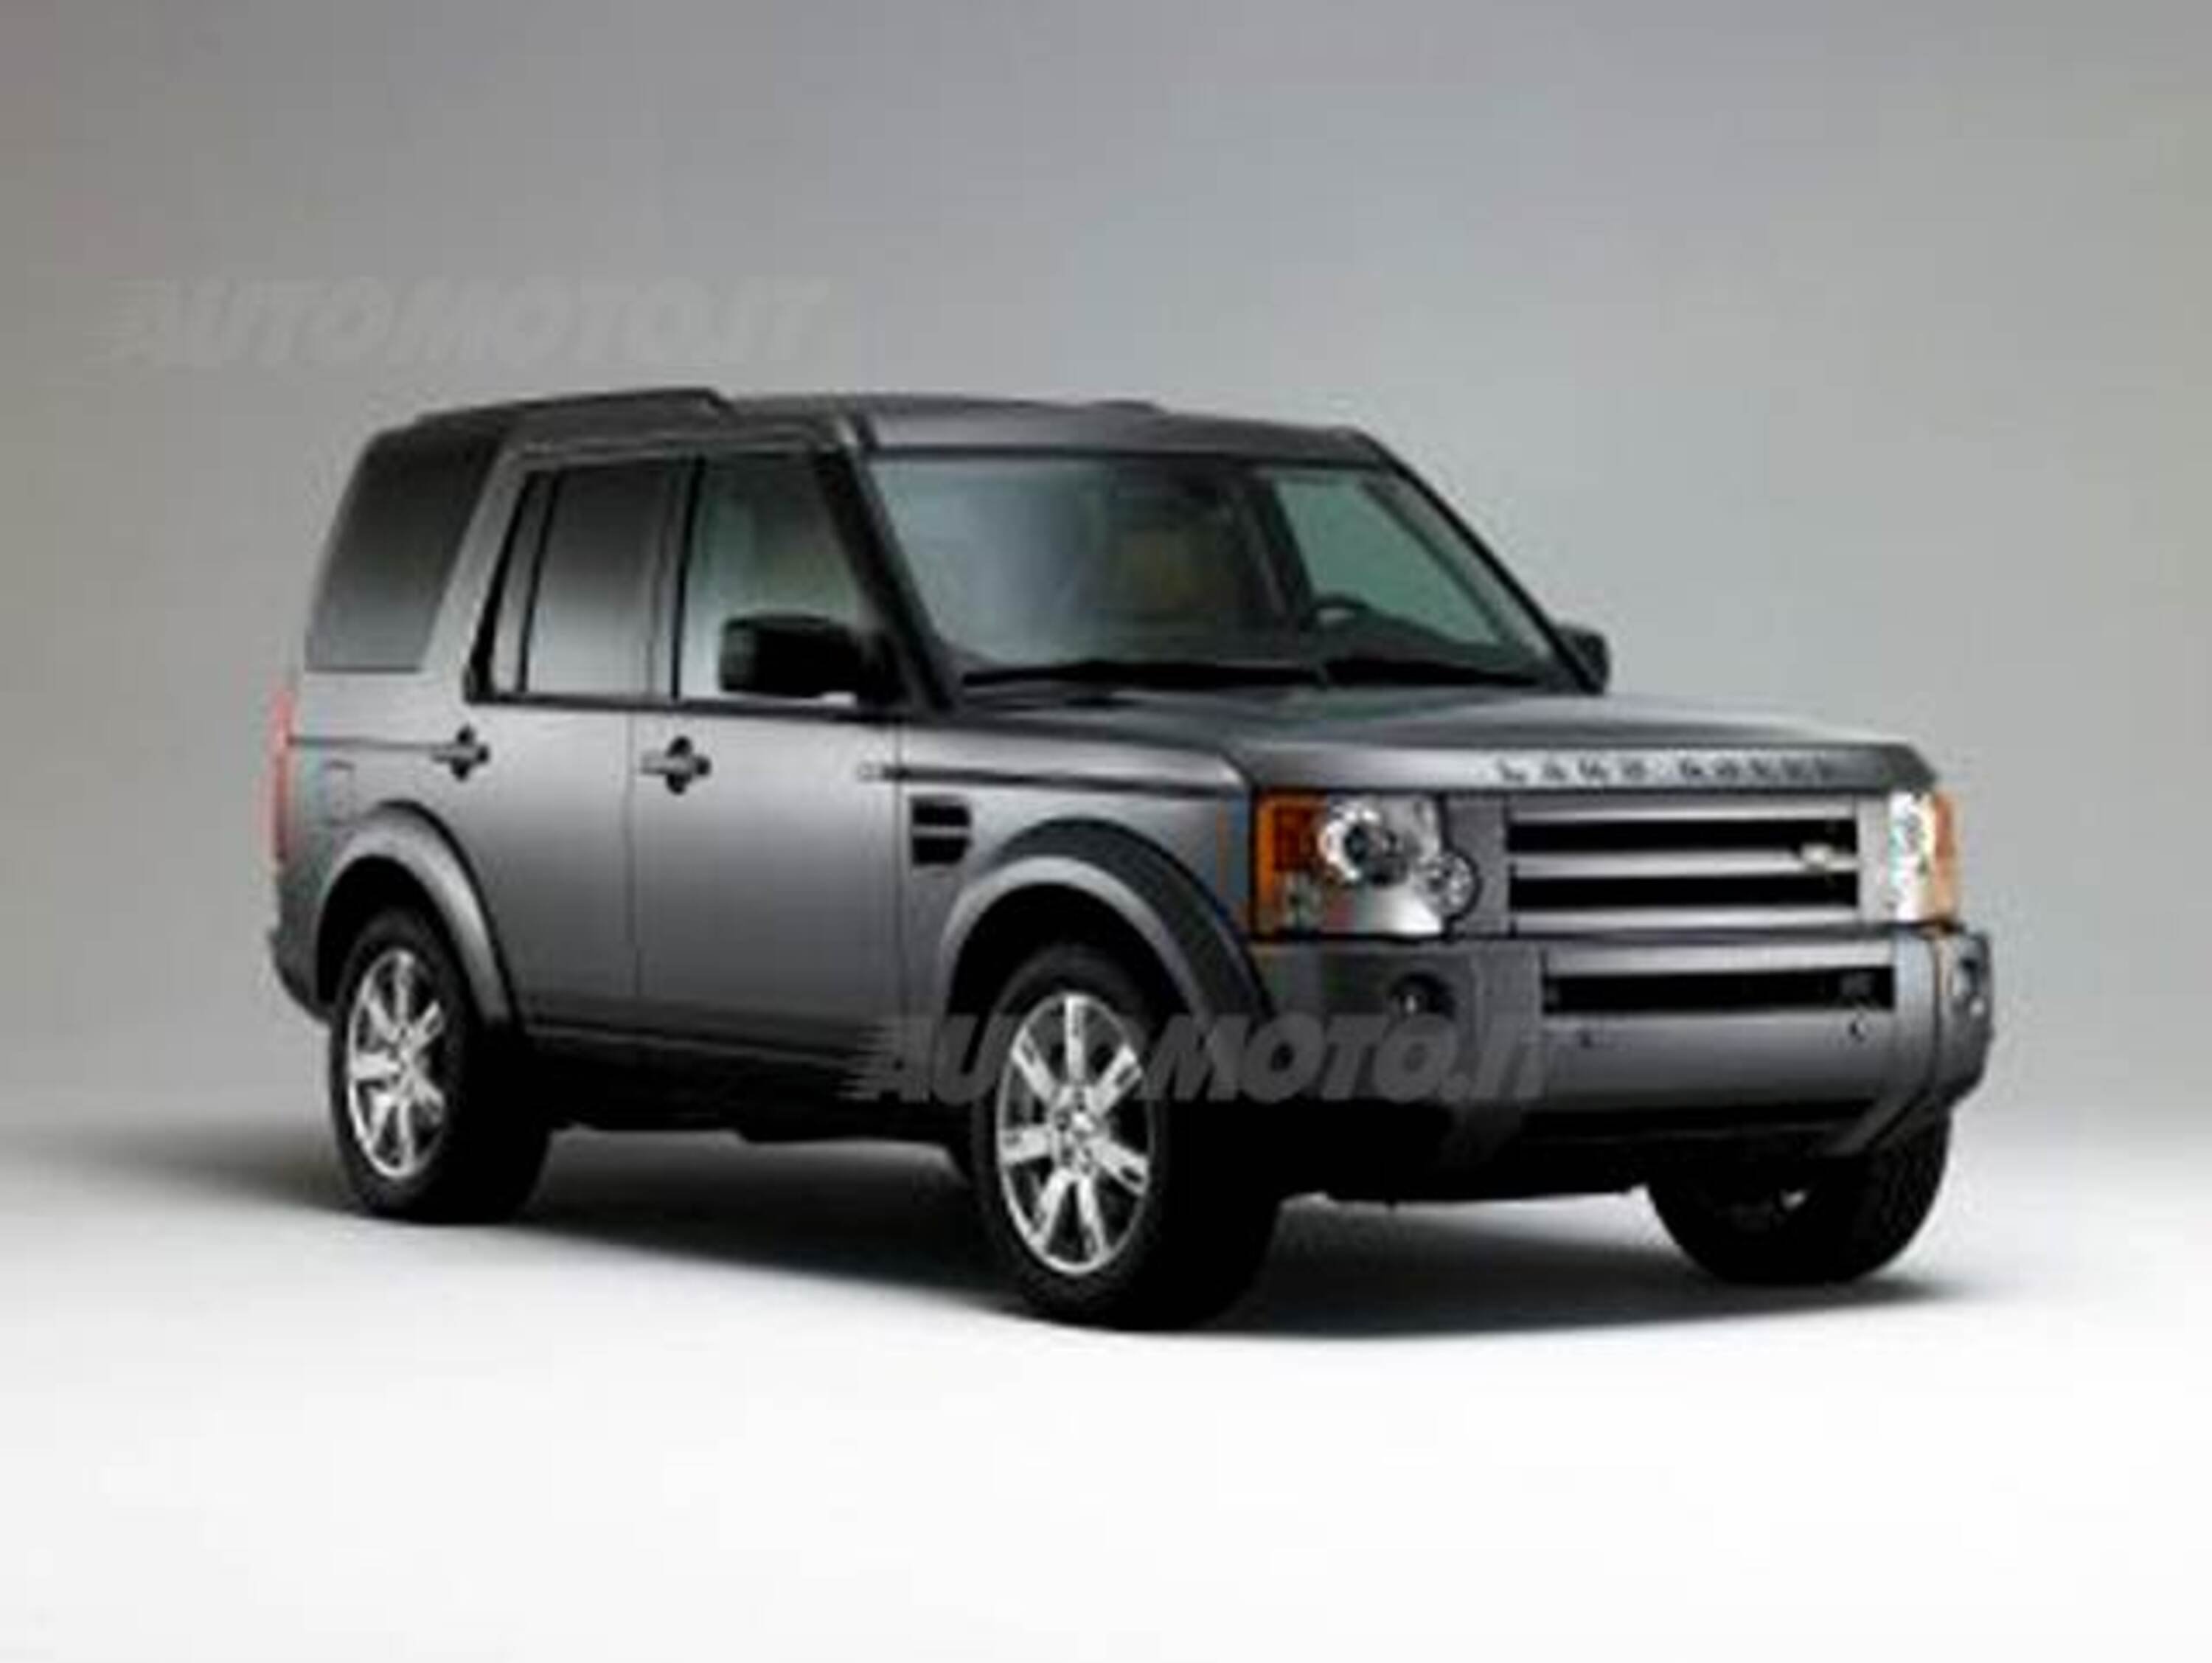 Land Rover Discovery 3 2.7 TDV6 HSE my 08